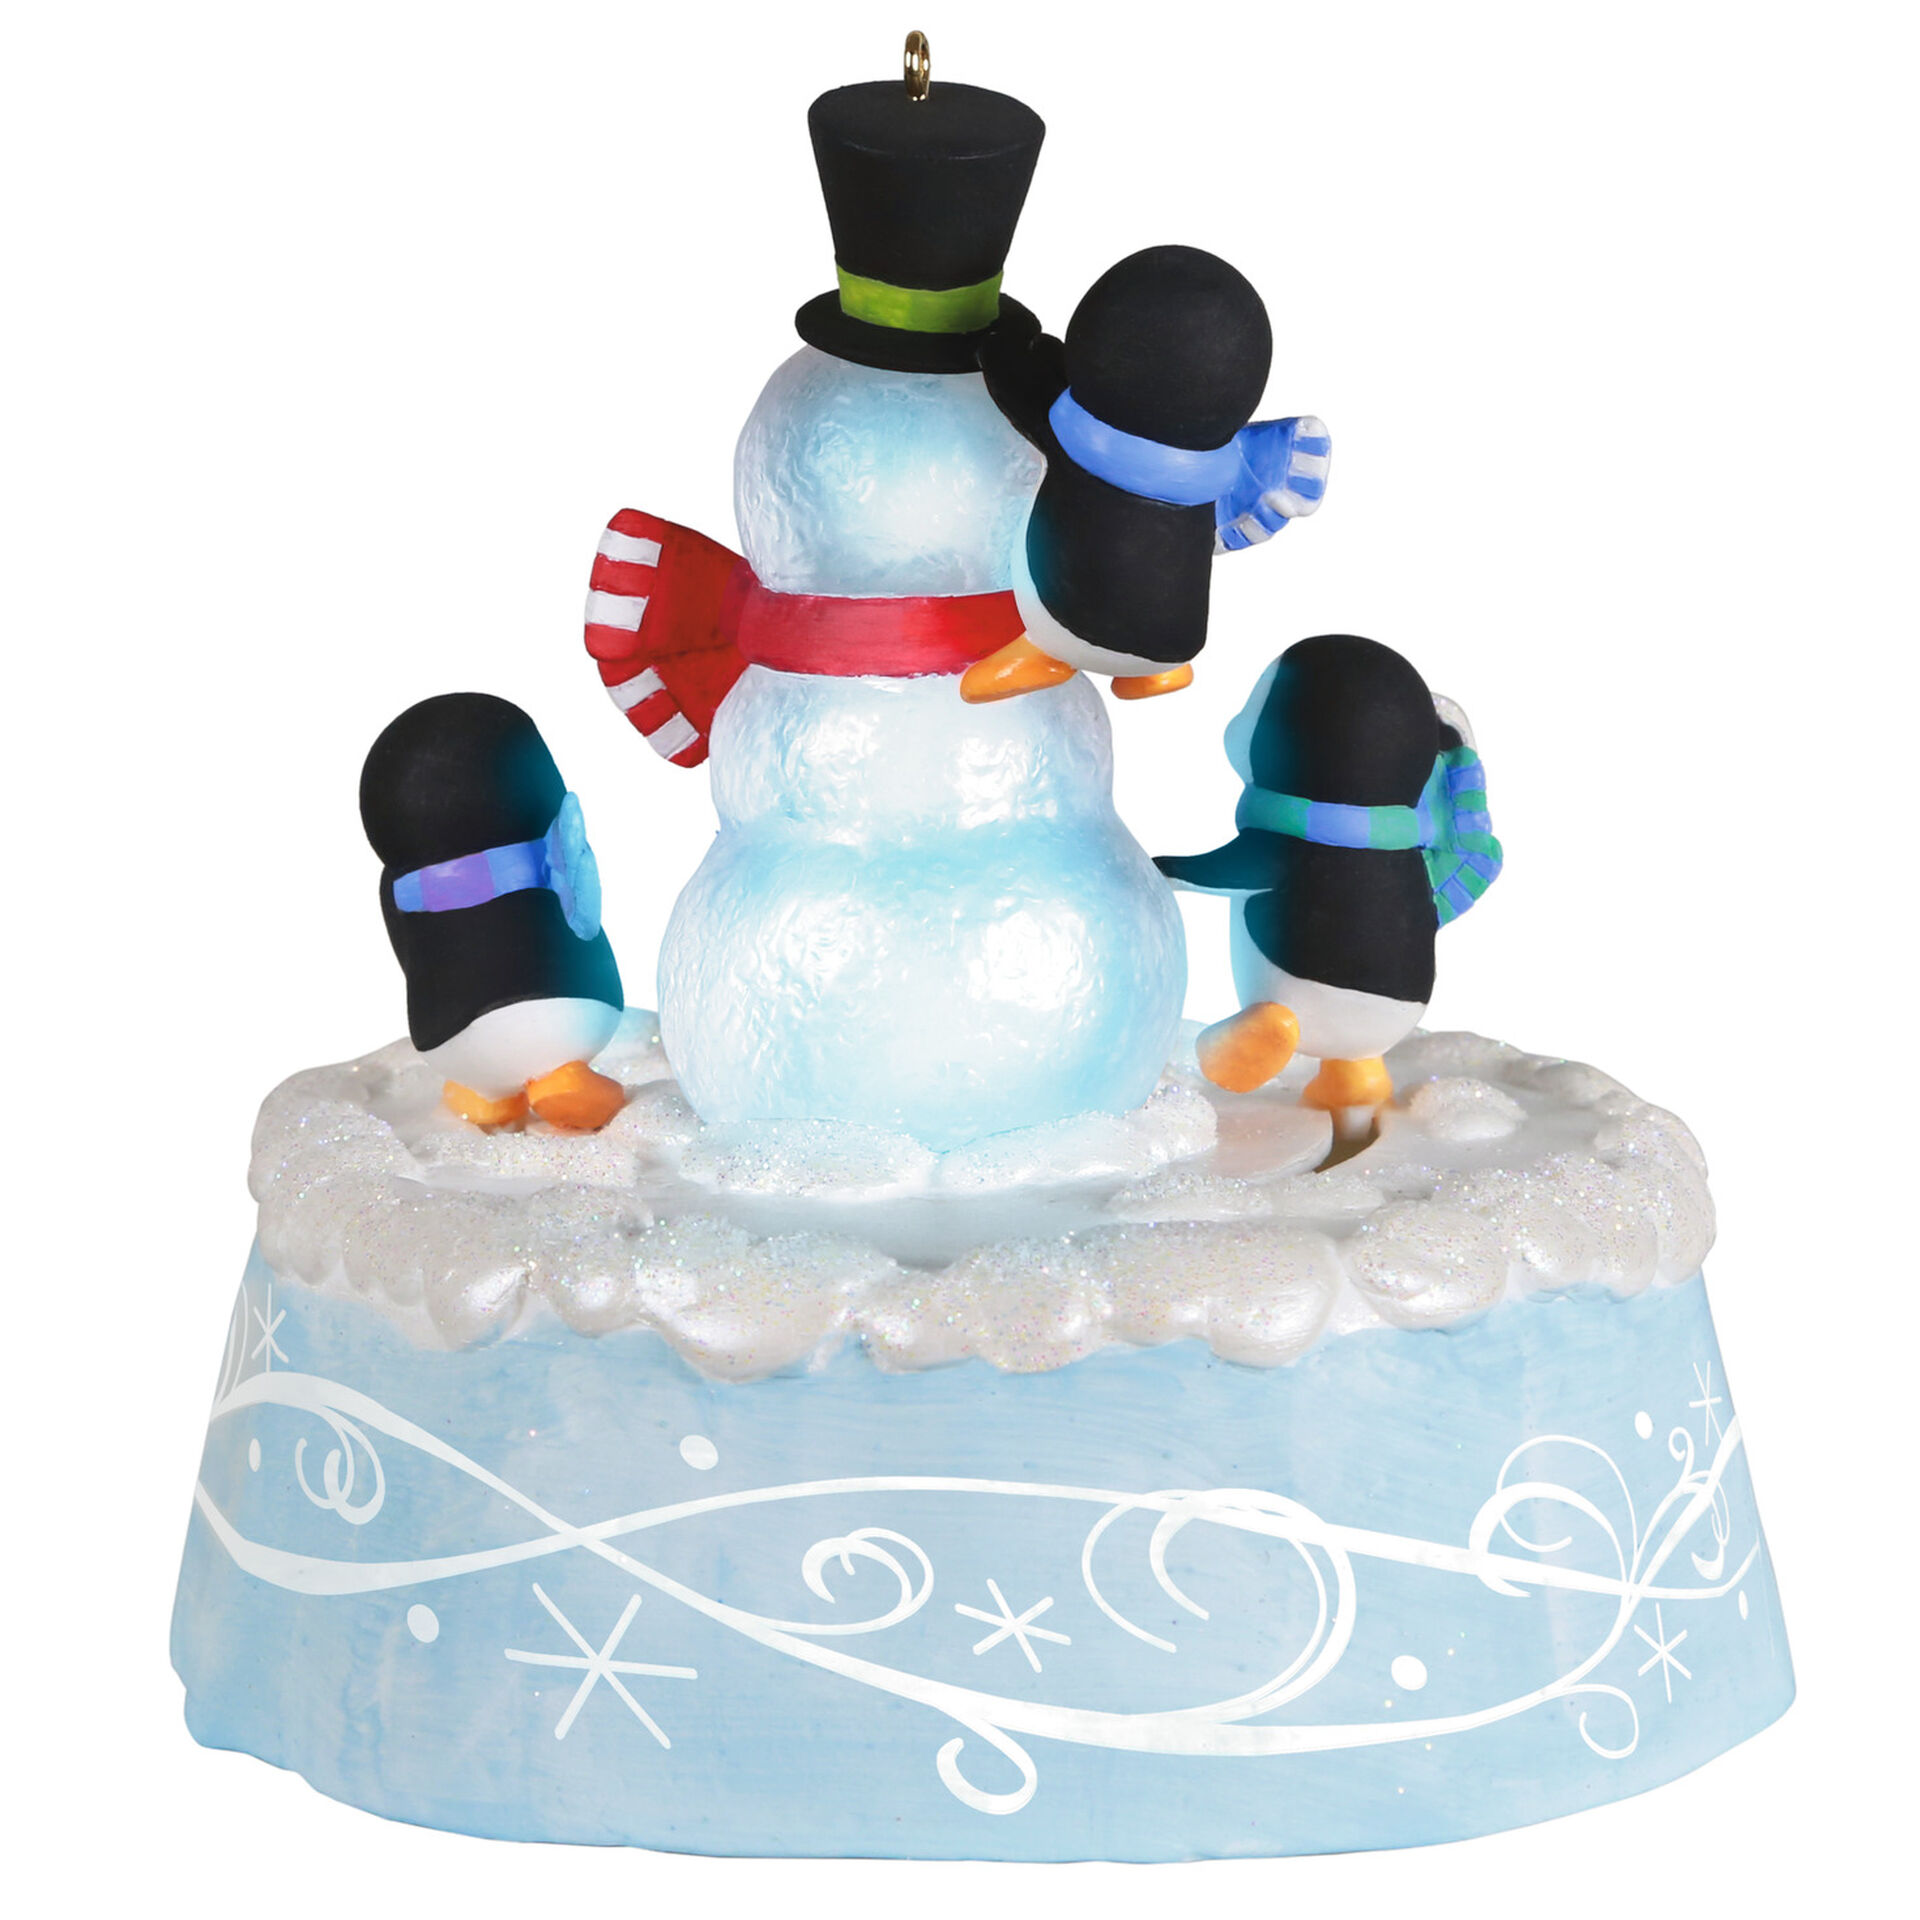 Playful Penguins Musical Ornament With Light and Motion 2021